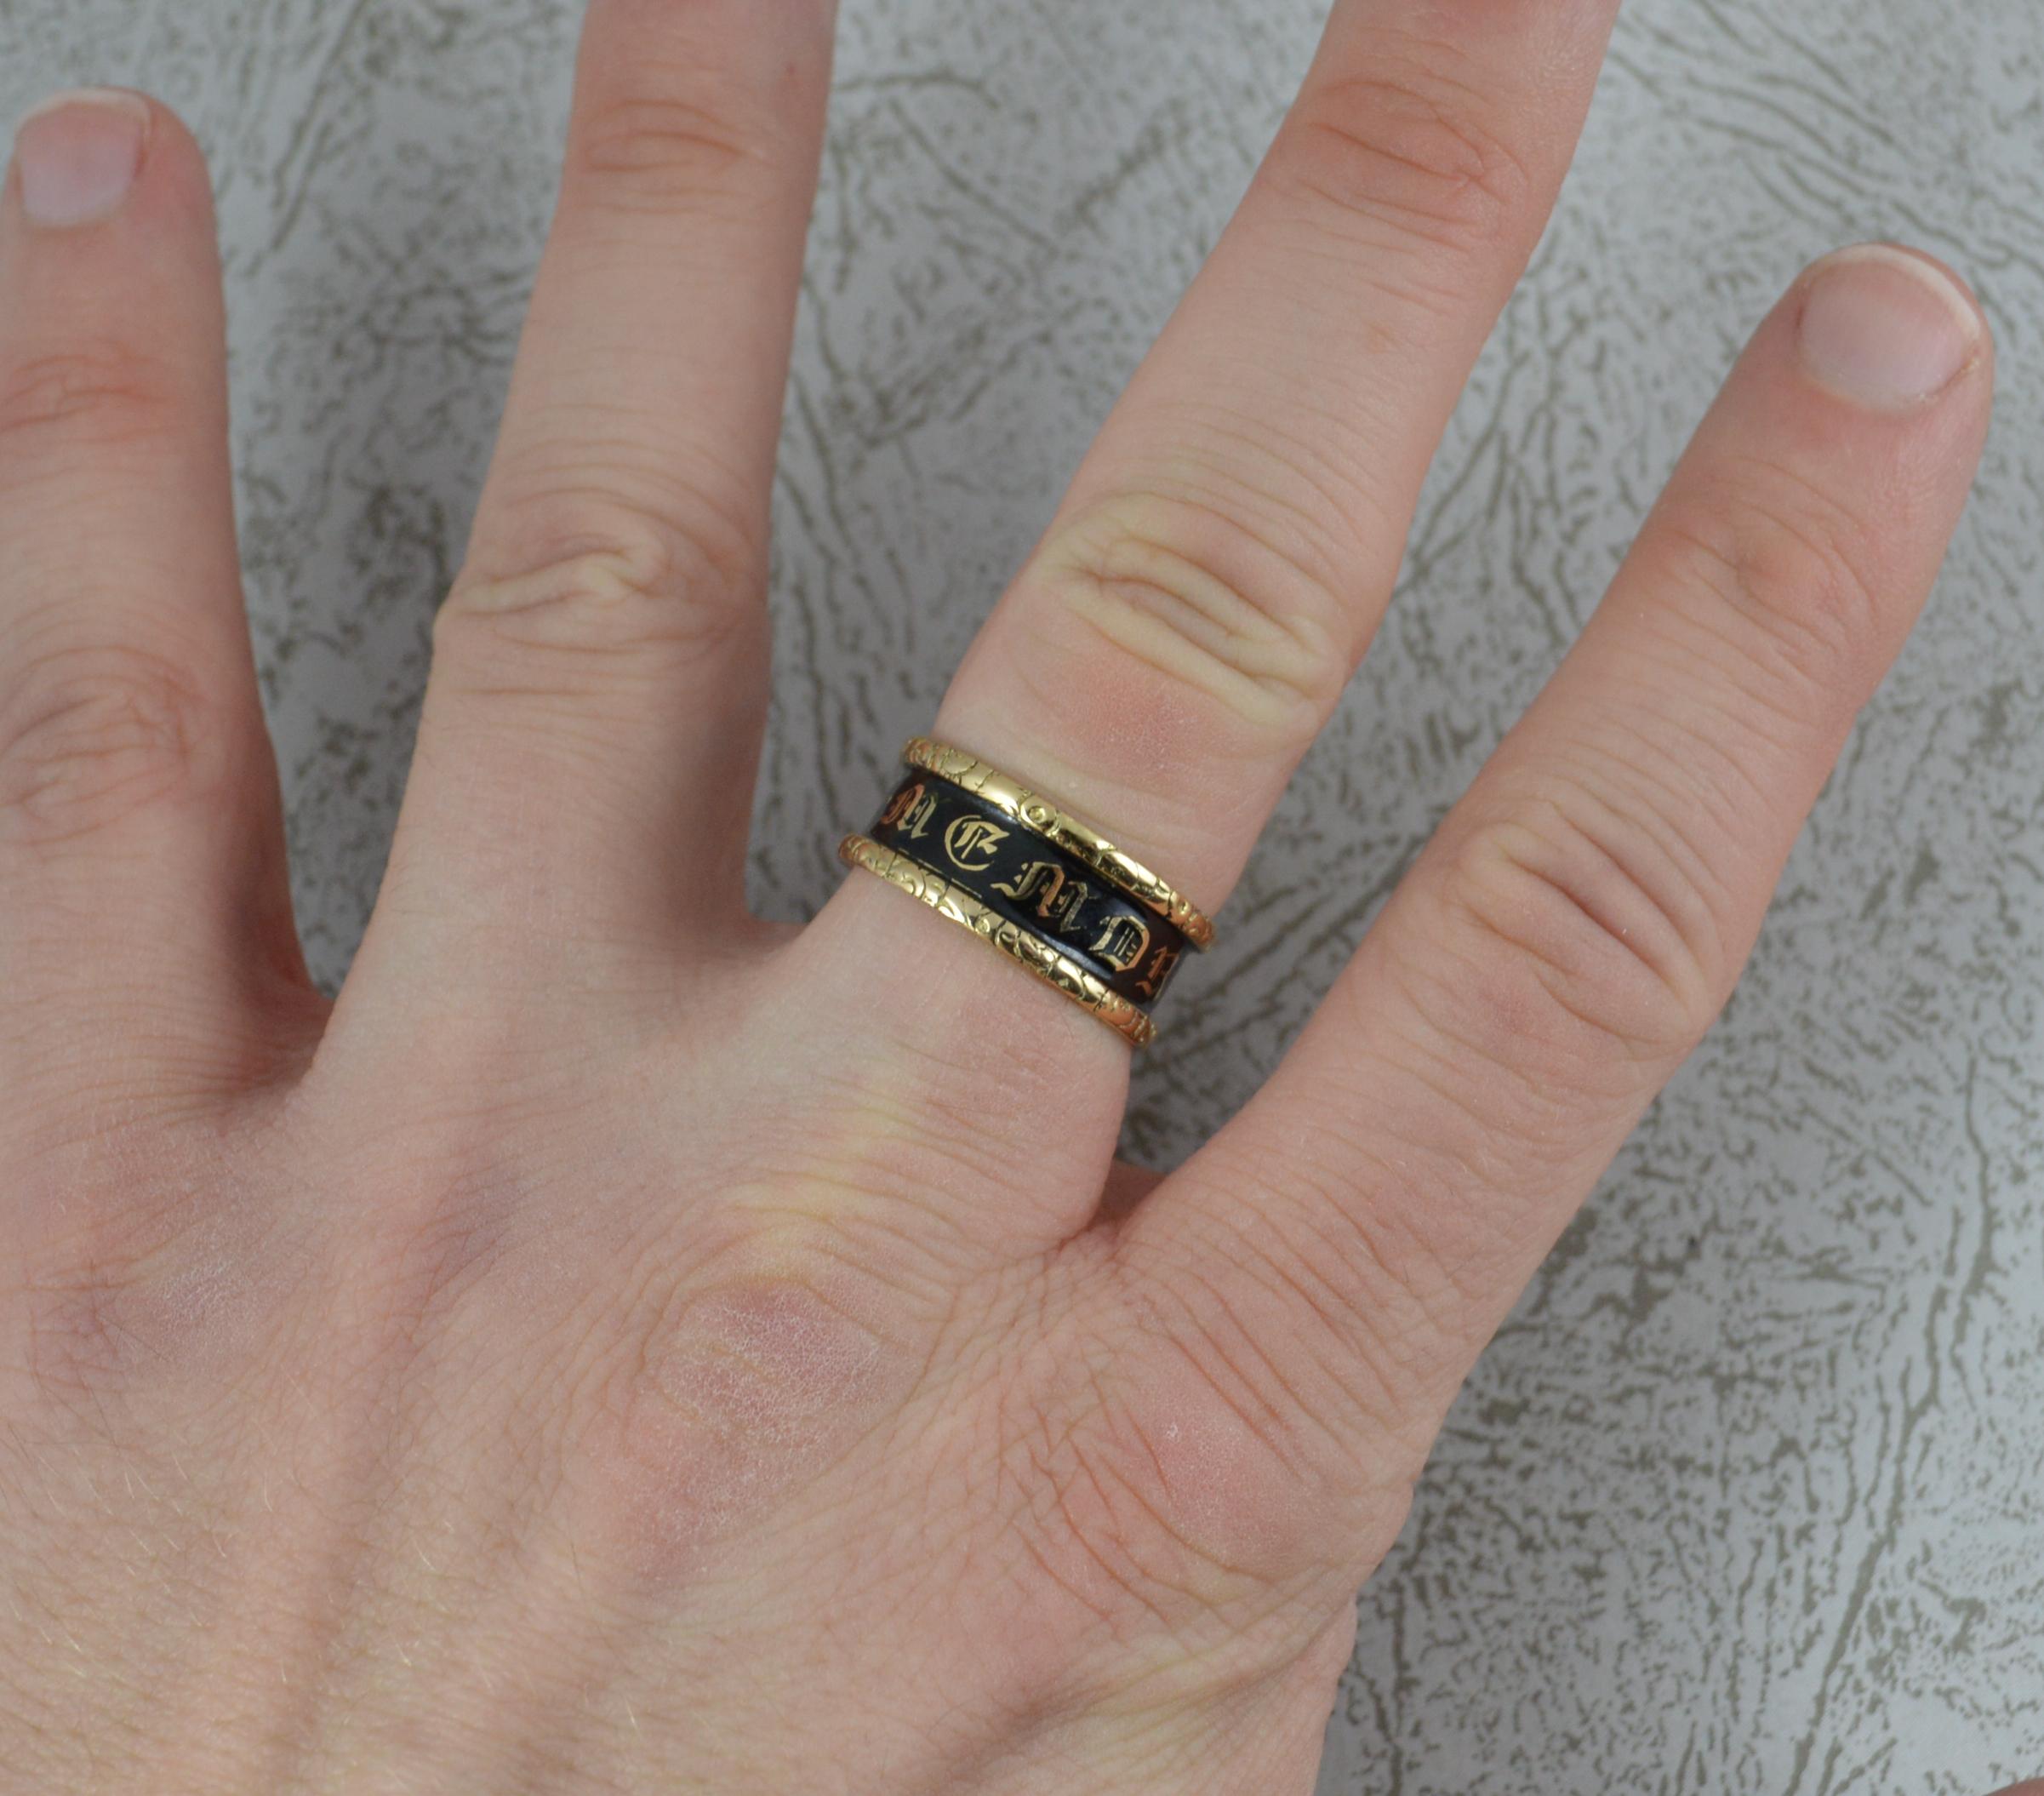 A Georgian period mourning band or stack ring in 18ct Gold.
8.1mm wide throughout.
Enamelled centre piece, In Memory Of. With deep floral relief to the edges.
A pretty design with fine engraving to inside. C Wales, died 30 Dec 1836, aged